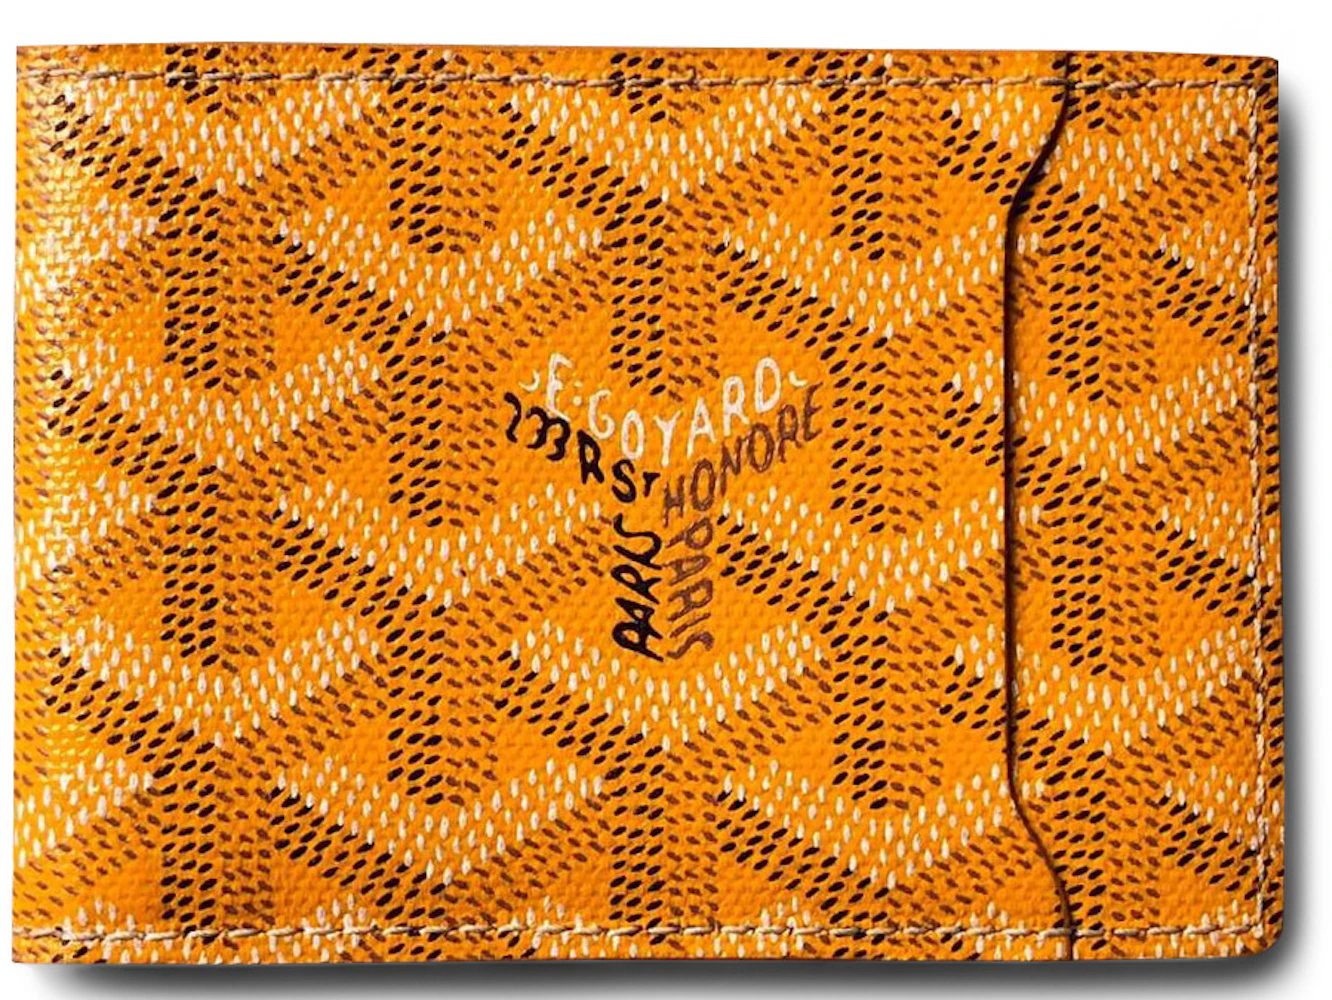 Leather wallet Goyard Yellow in Leather - 31972584